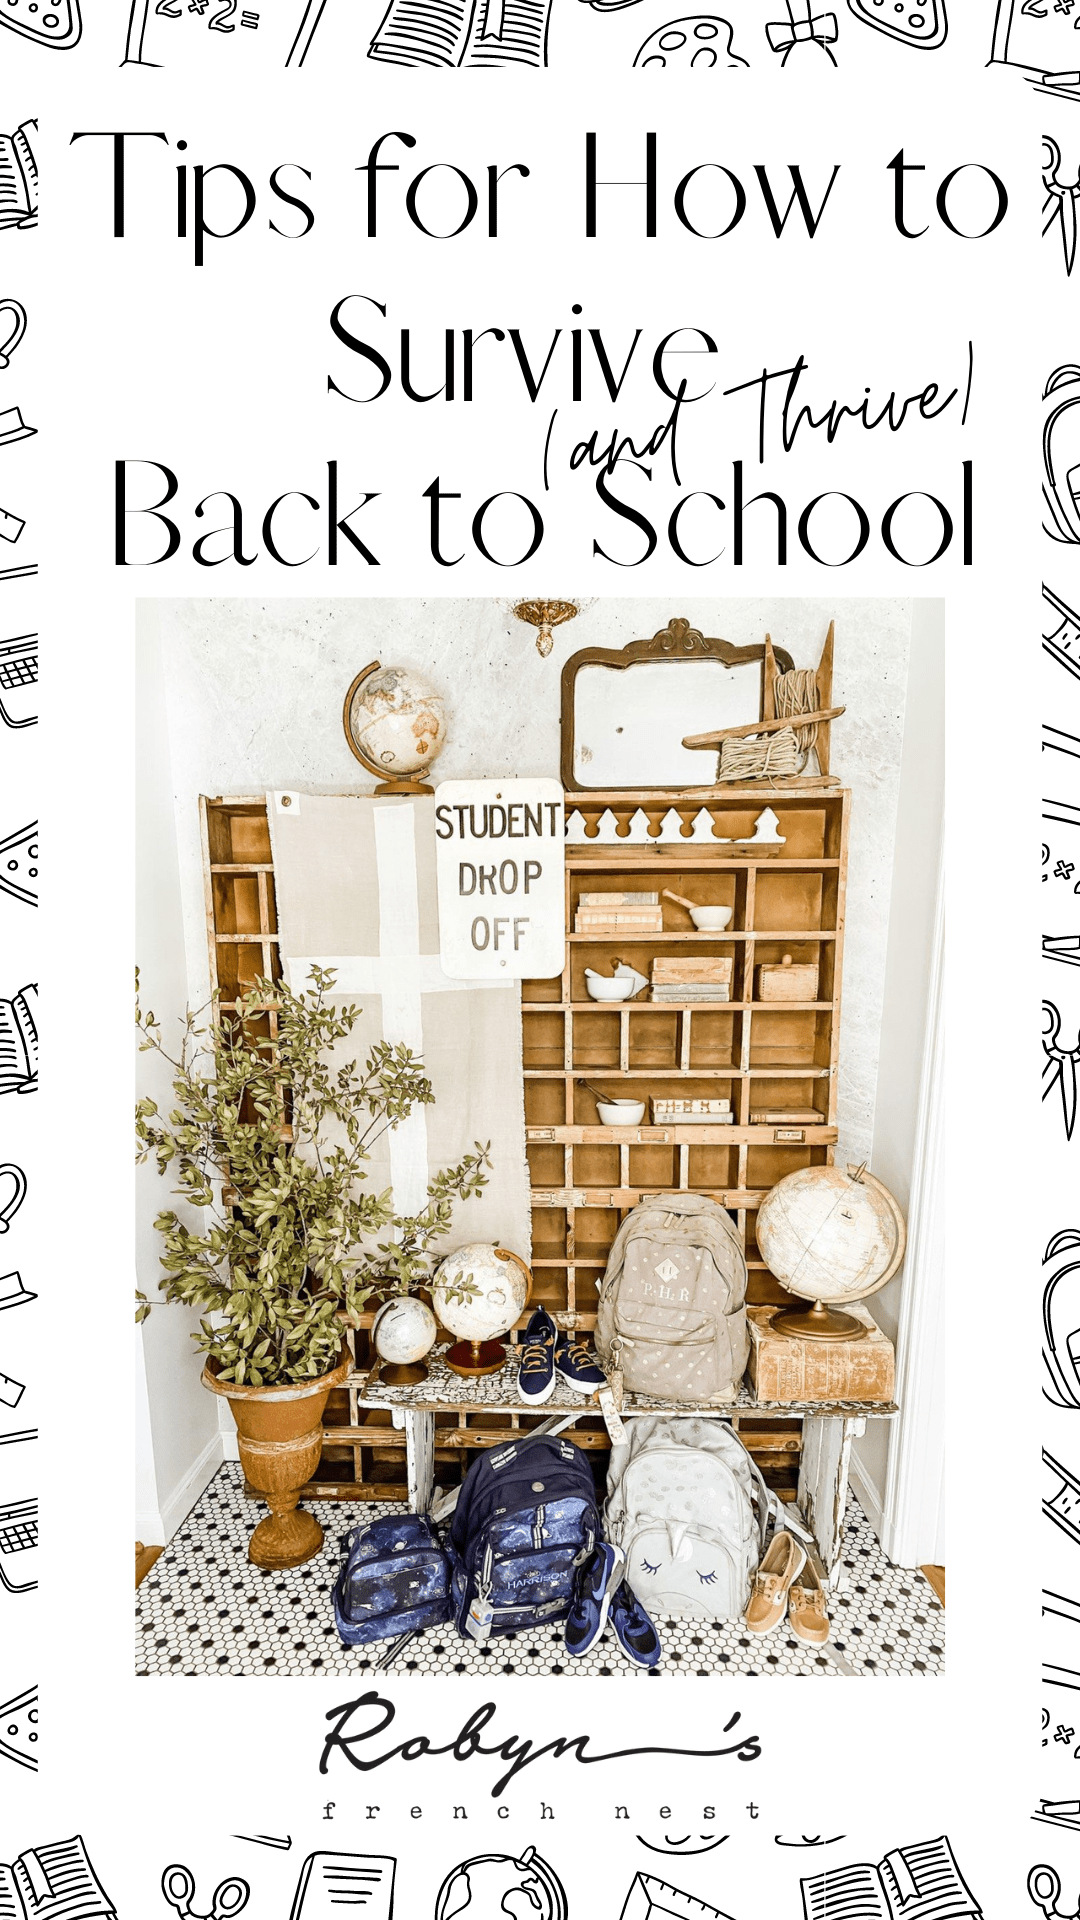 21 Tips for Back to School to Survive (and Thrive) as a Family 2022